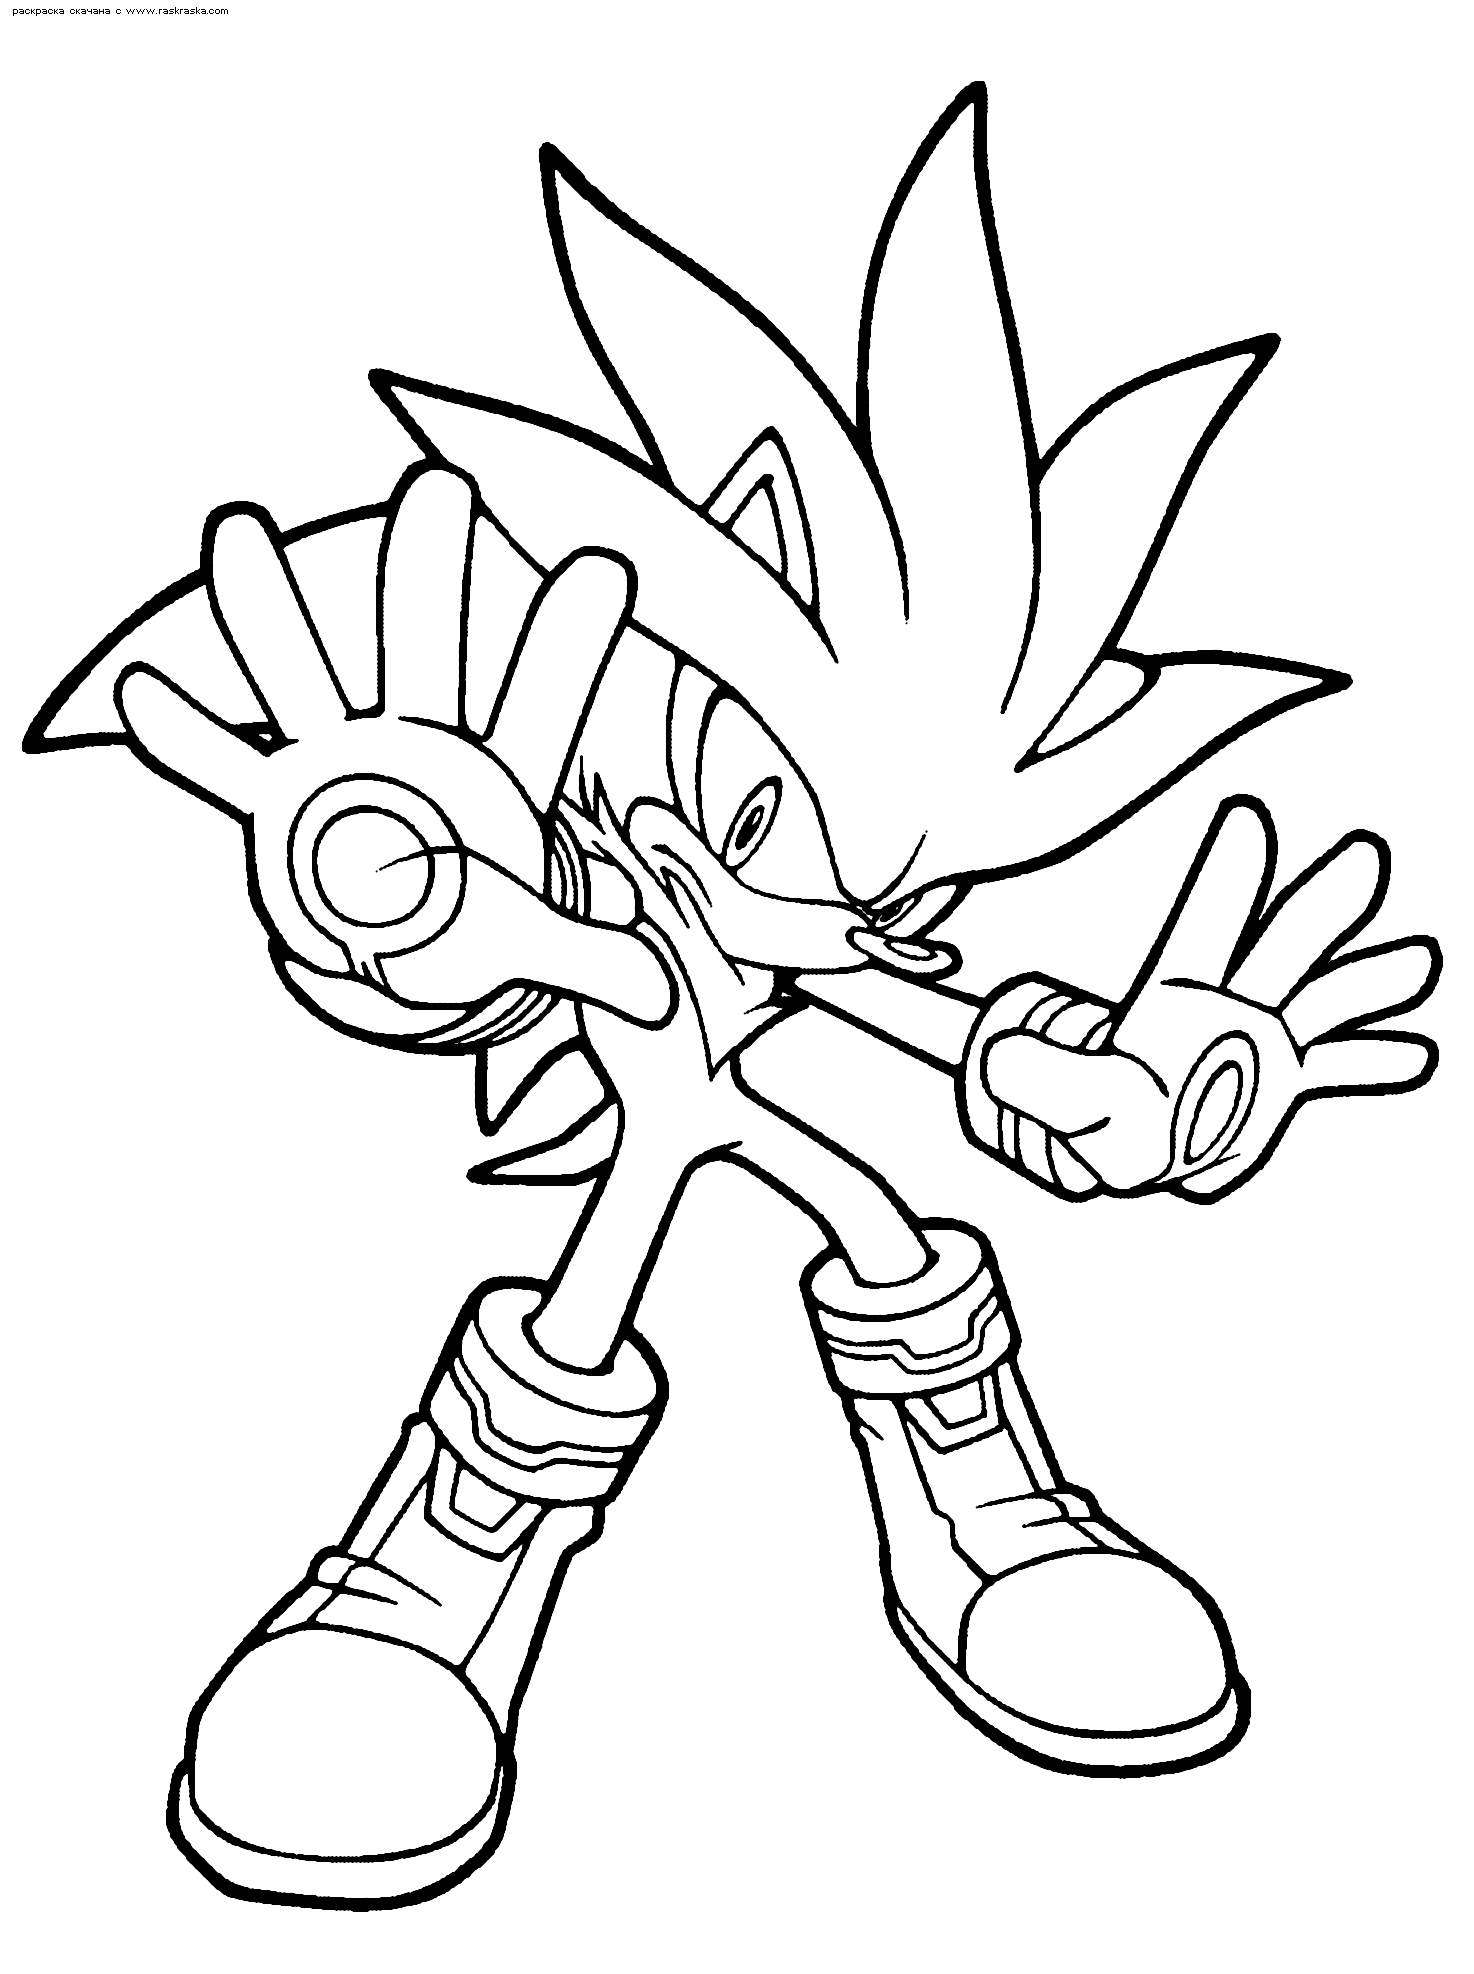 Sonic Coloring Pages (13) - Coloringkids.org